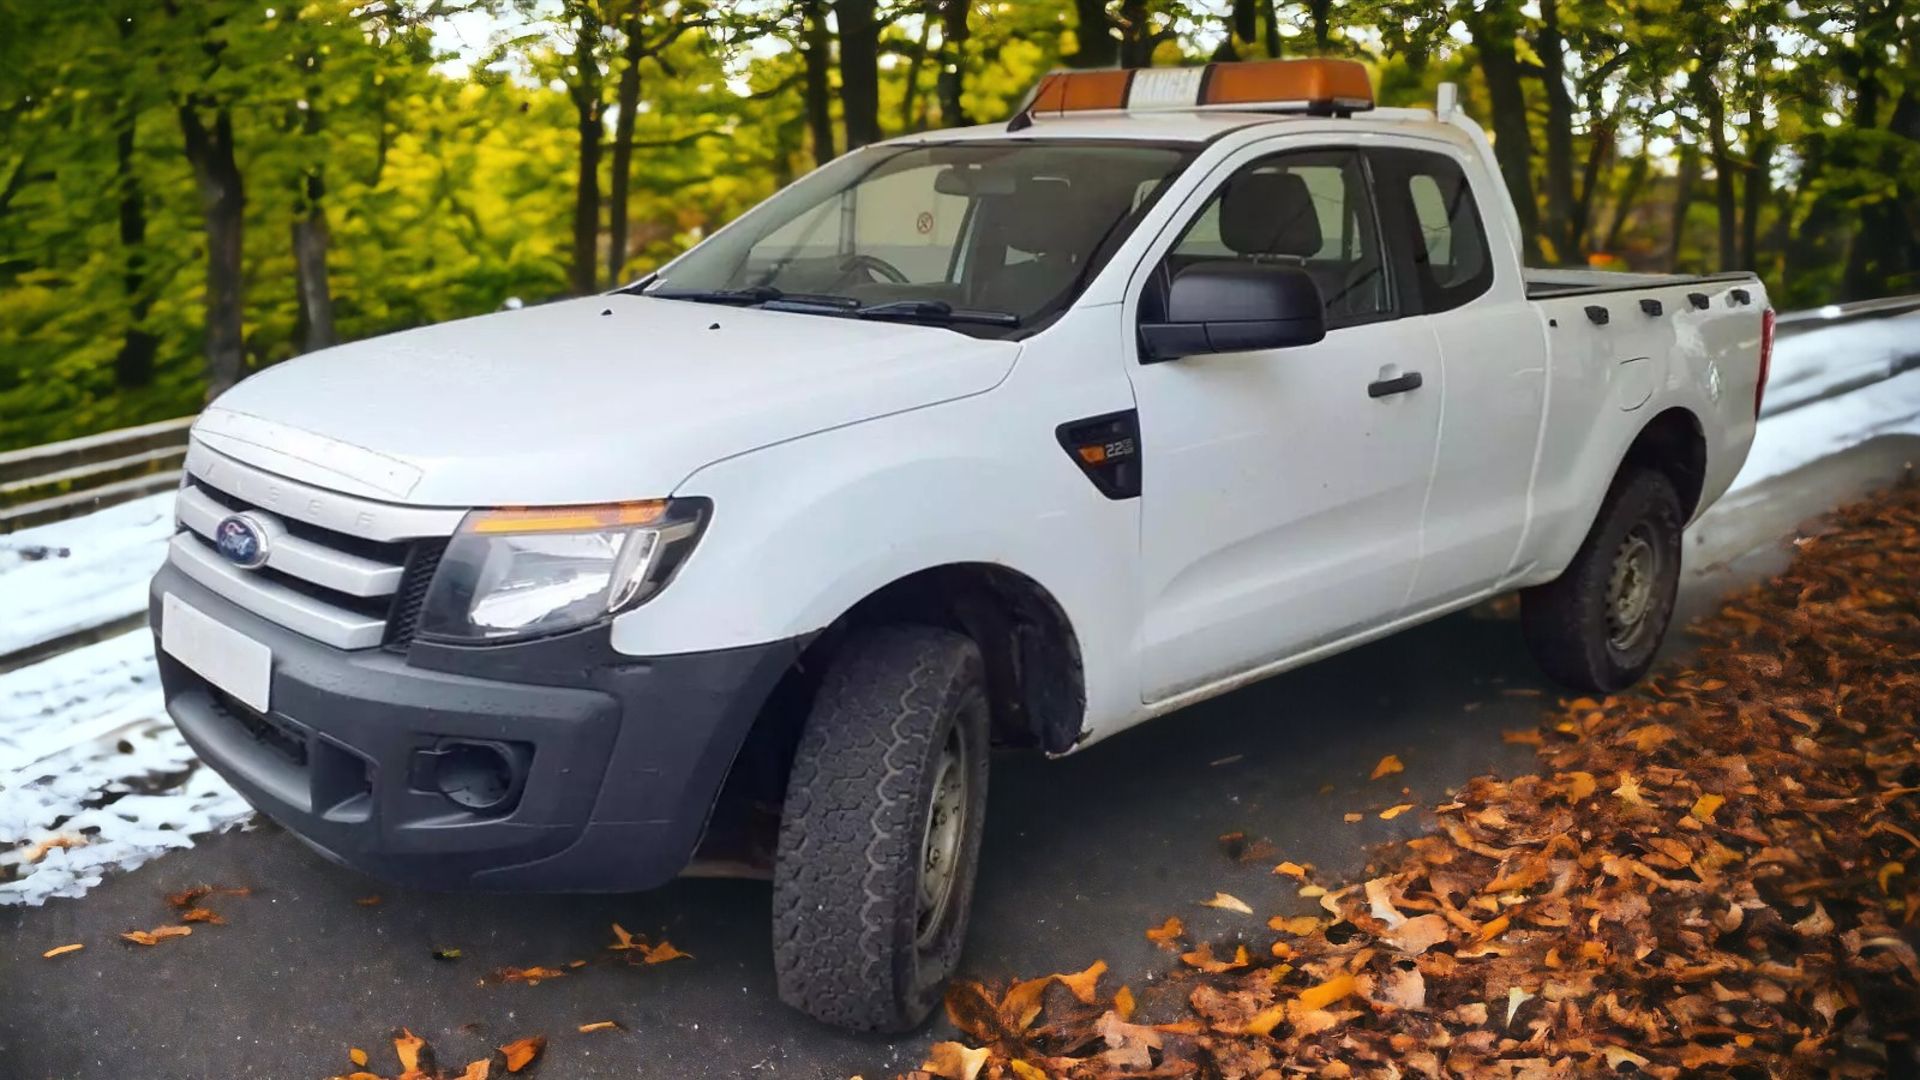 FORD RANGER XL SUPER CAB 4X4 PICKUP: BUILT TOUGH FOR EVERY ADVENTURE